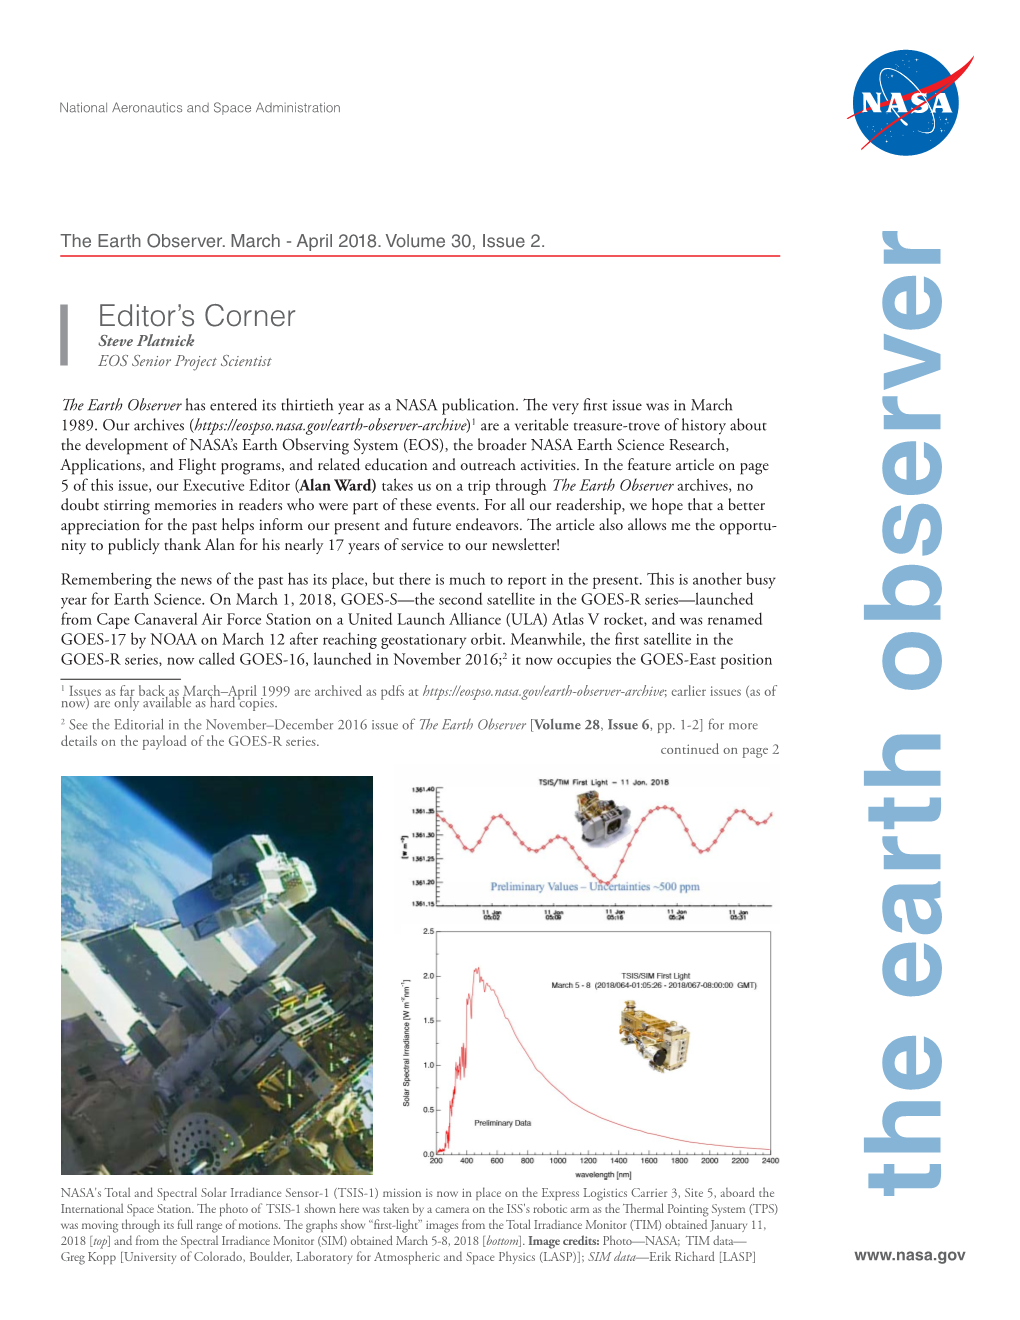 The Earth Observer. March-April 2018. Volume 30, 2